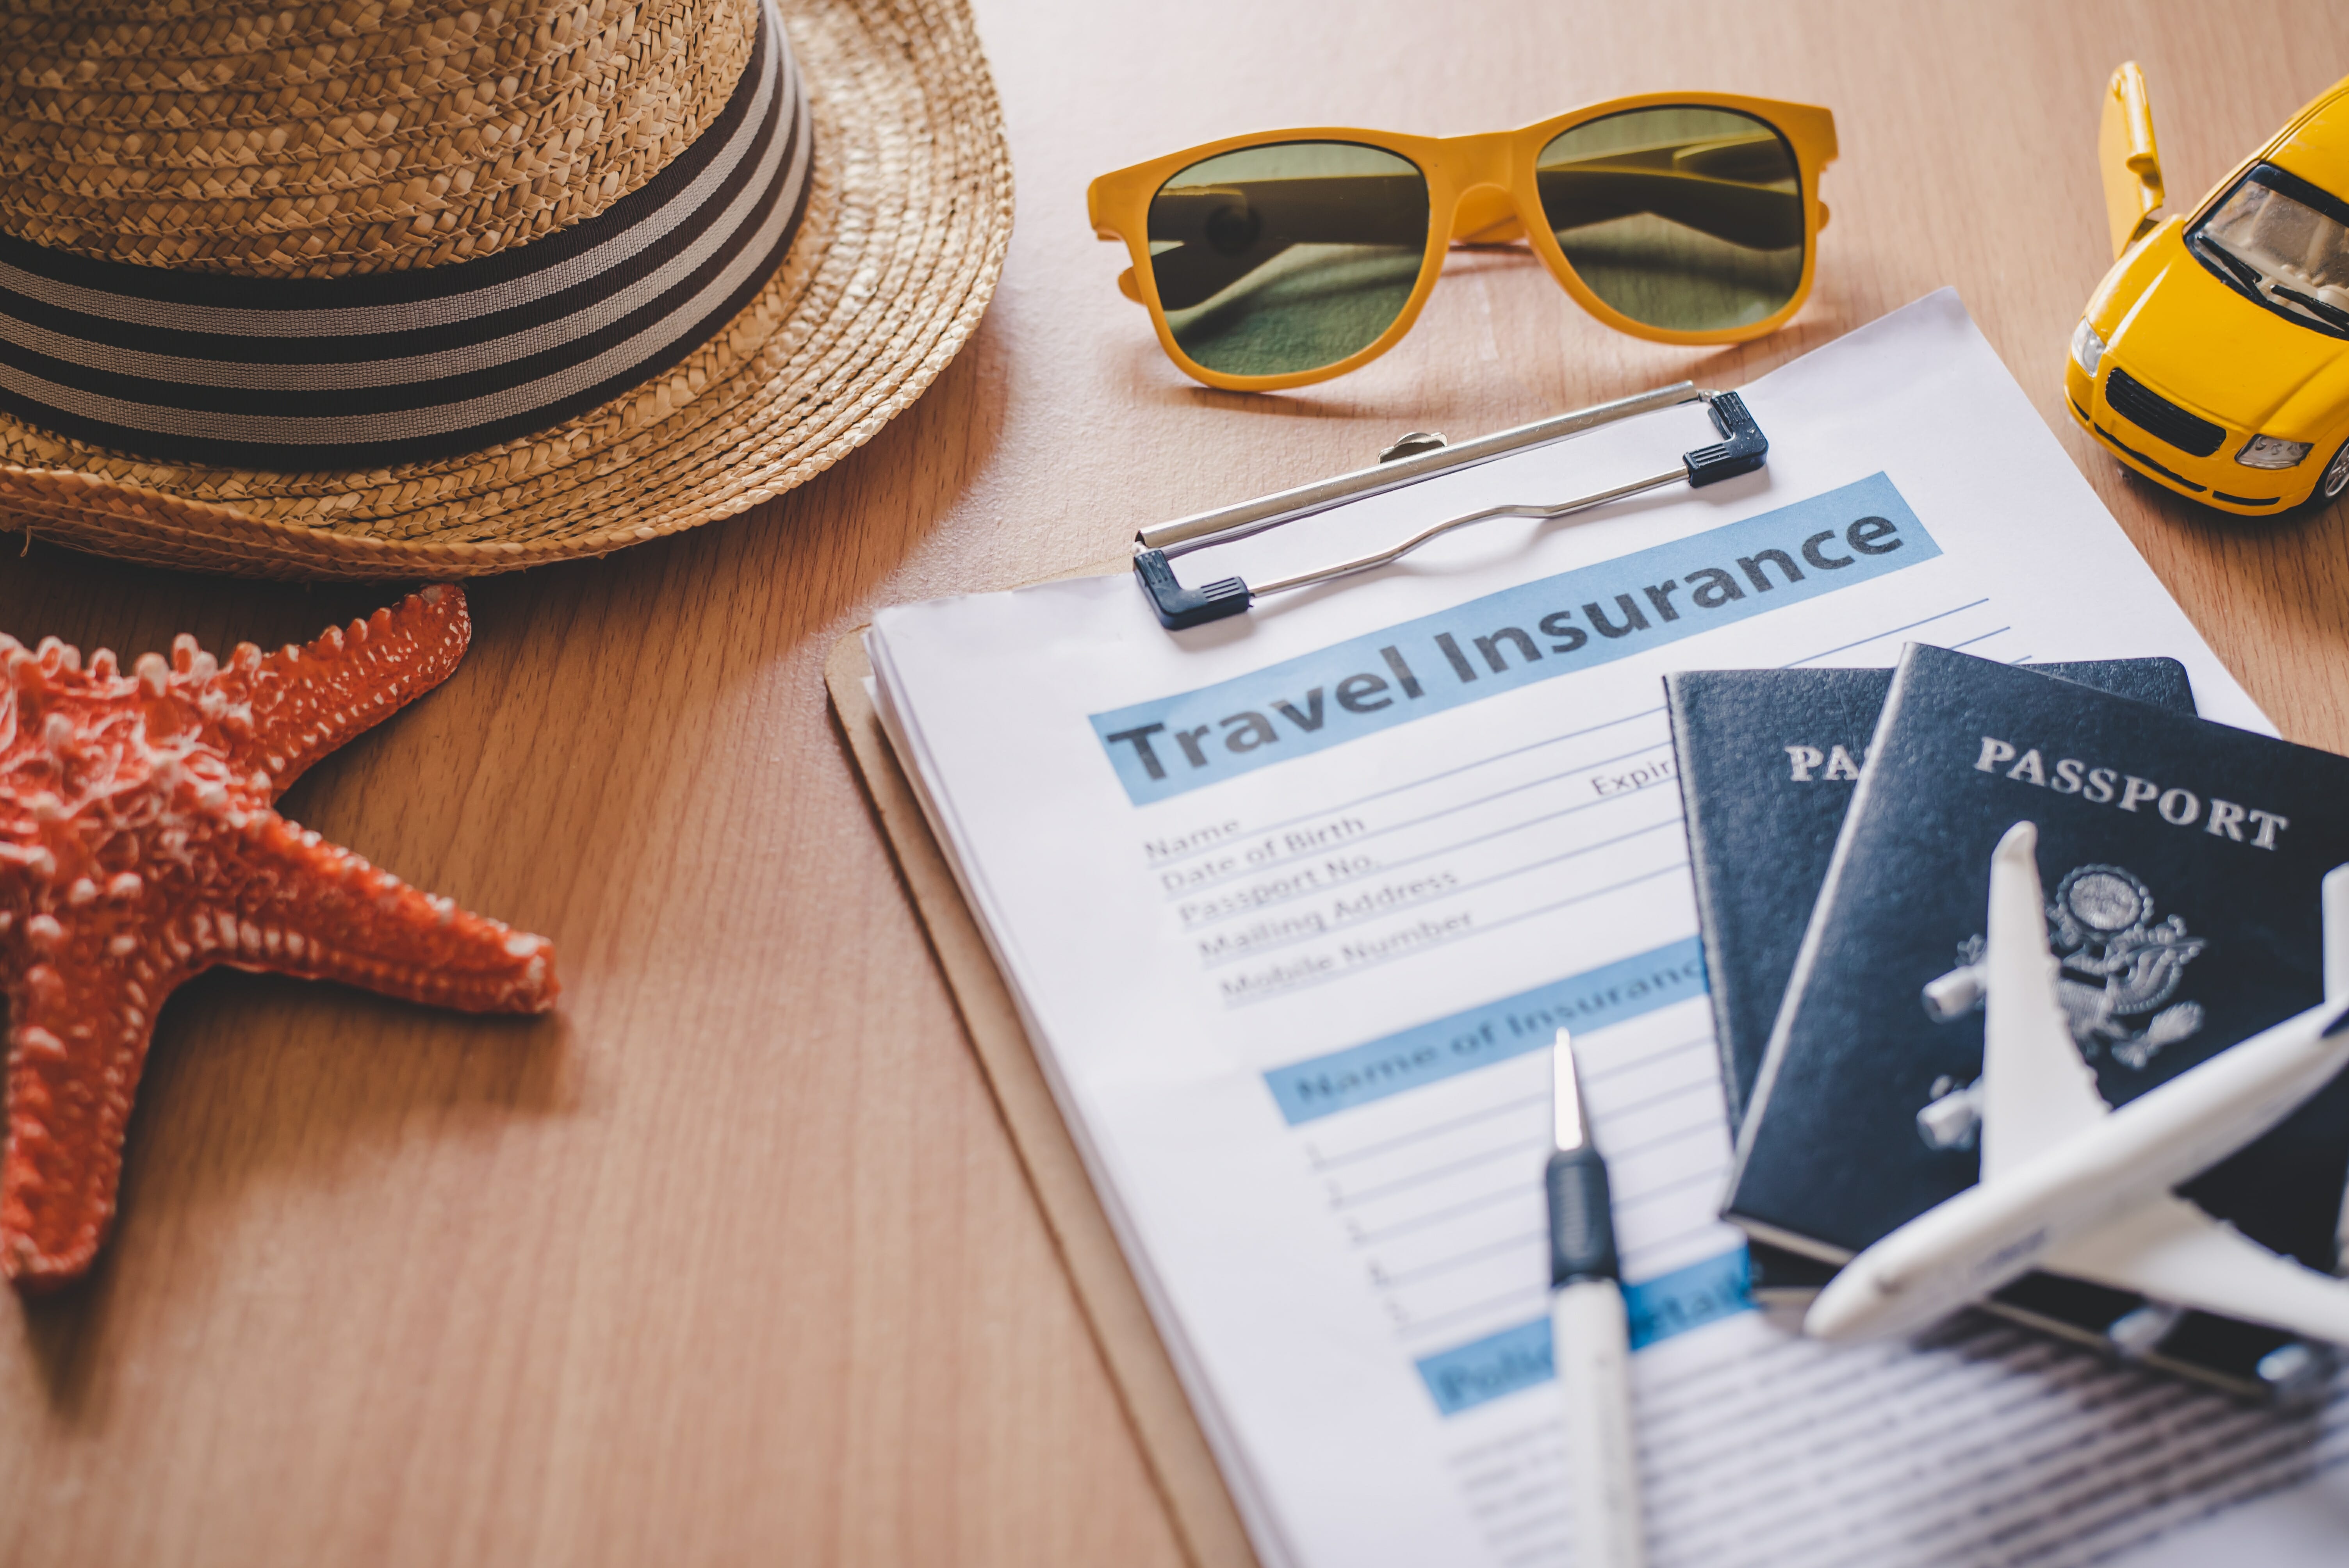 Travel insurance documents to help travelers feel confident in travel safety